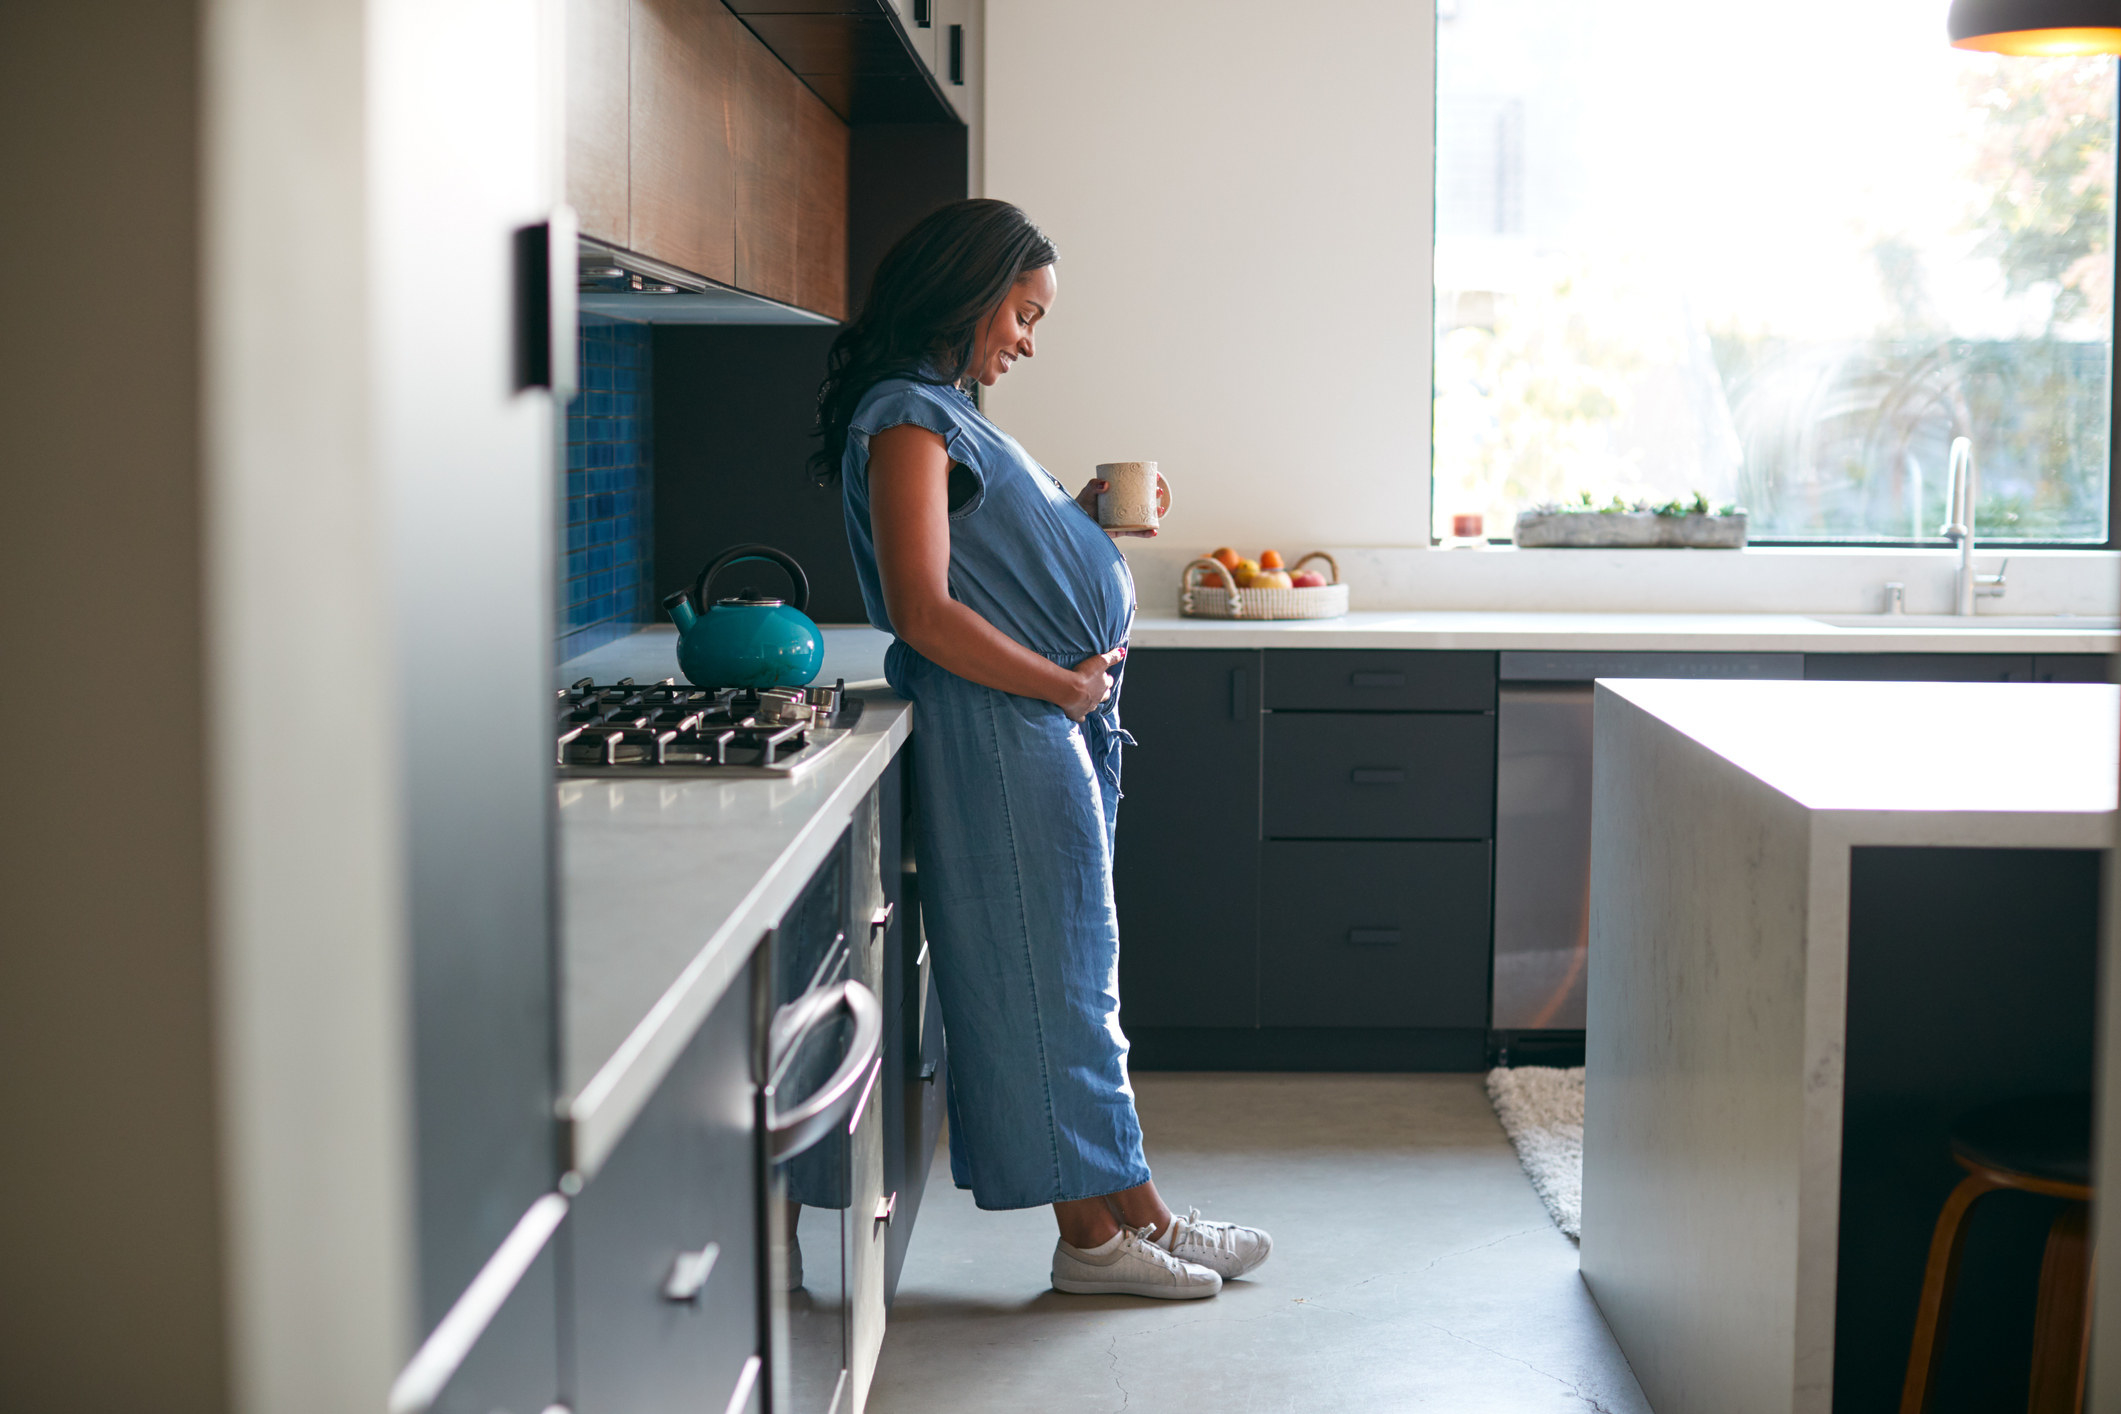 A pregnant woman stands in her kitchen enjoying a cup of tea and holding her bump